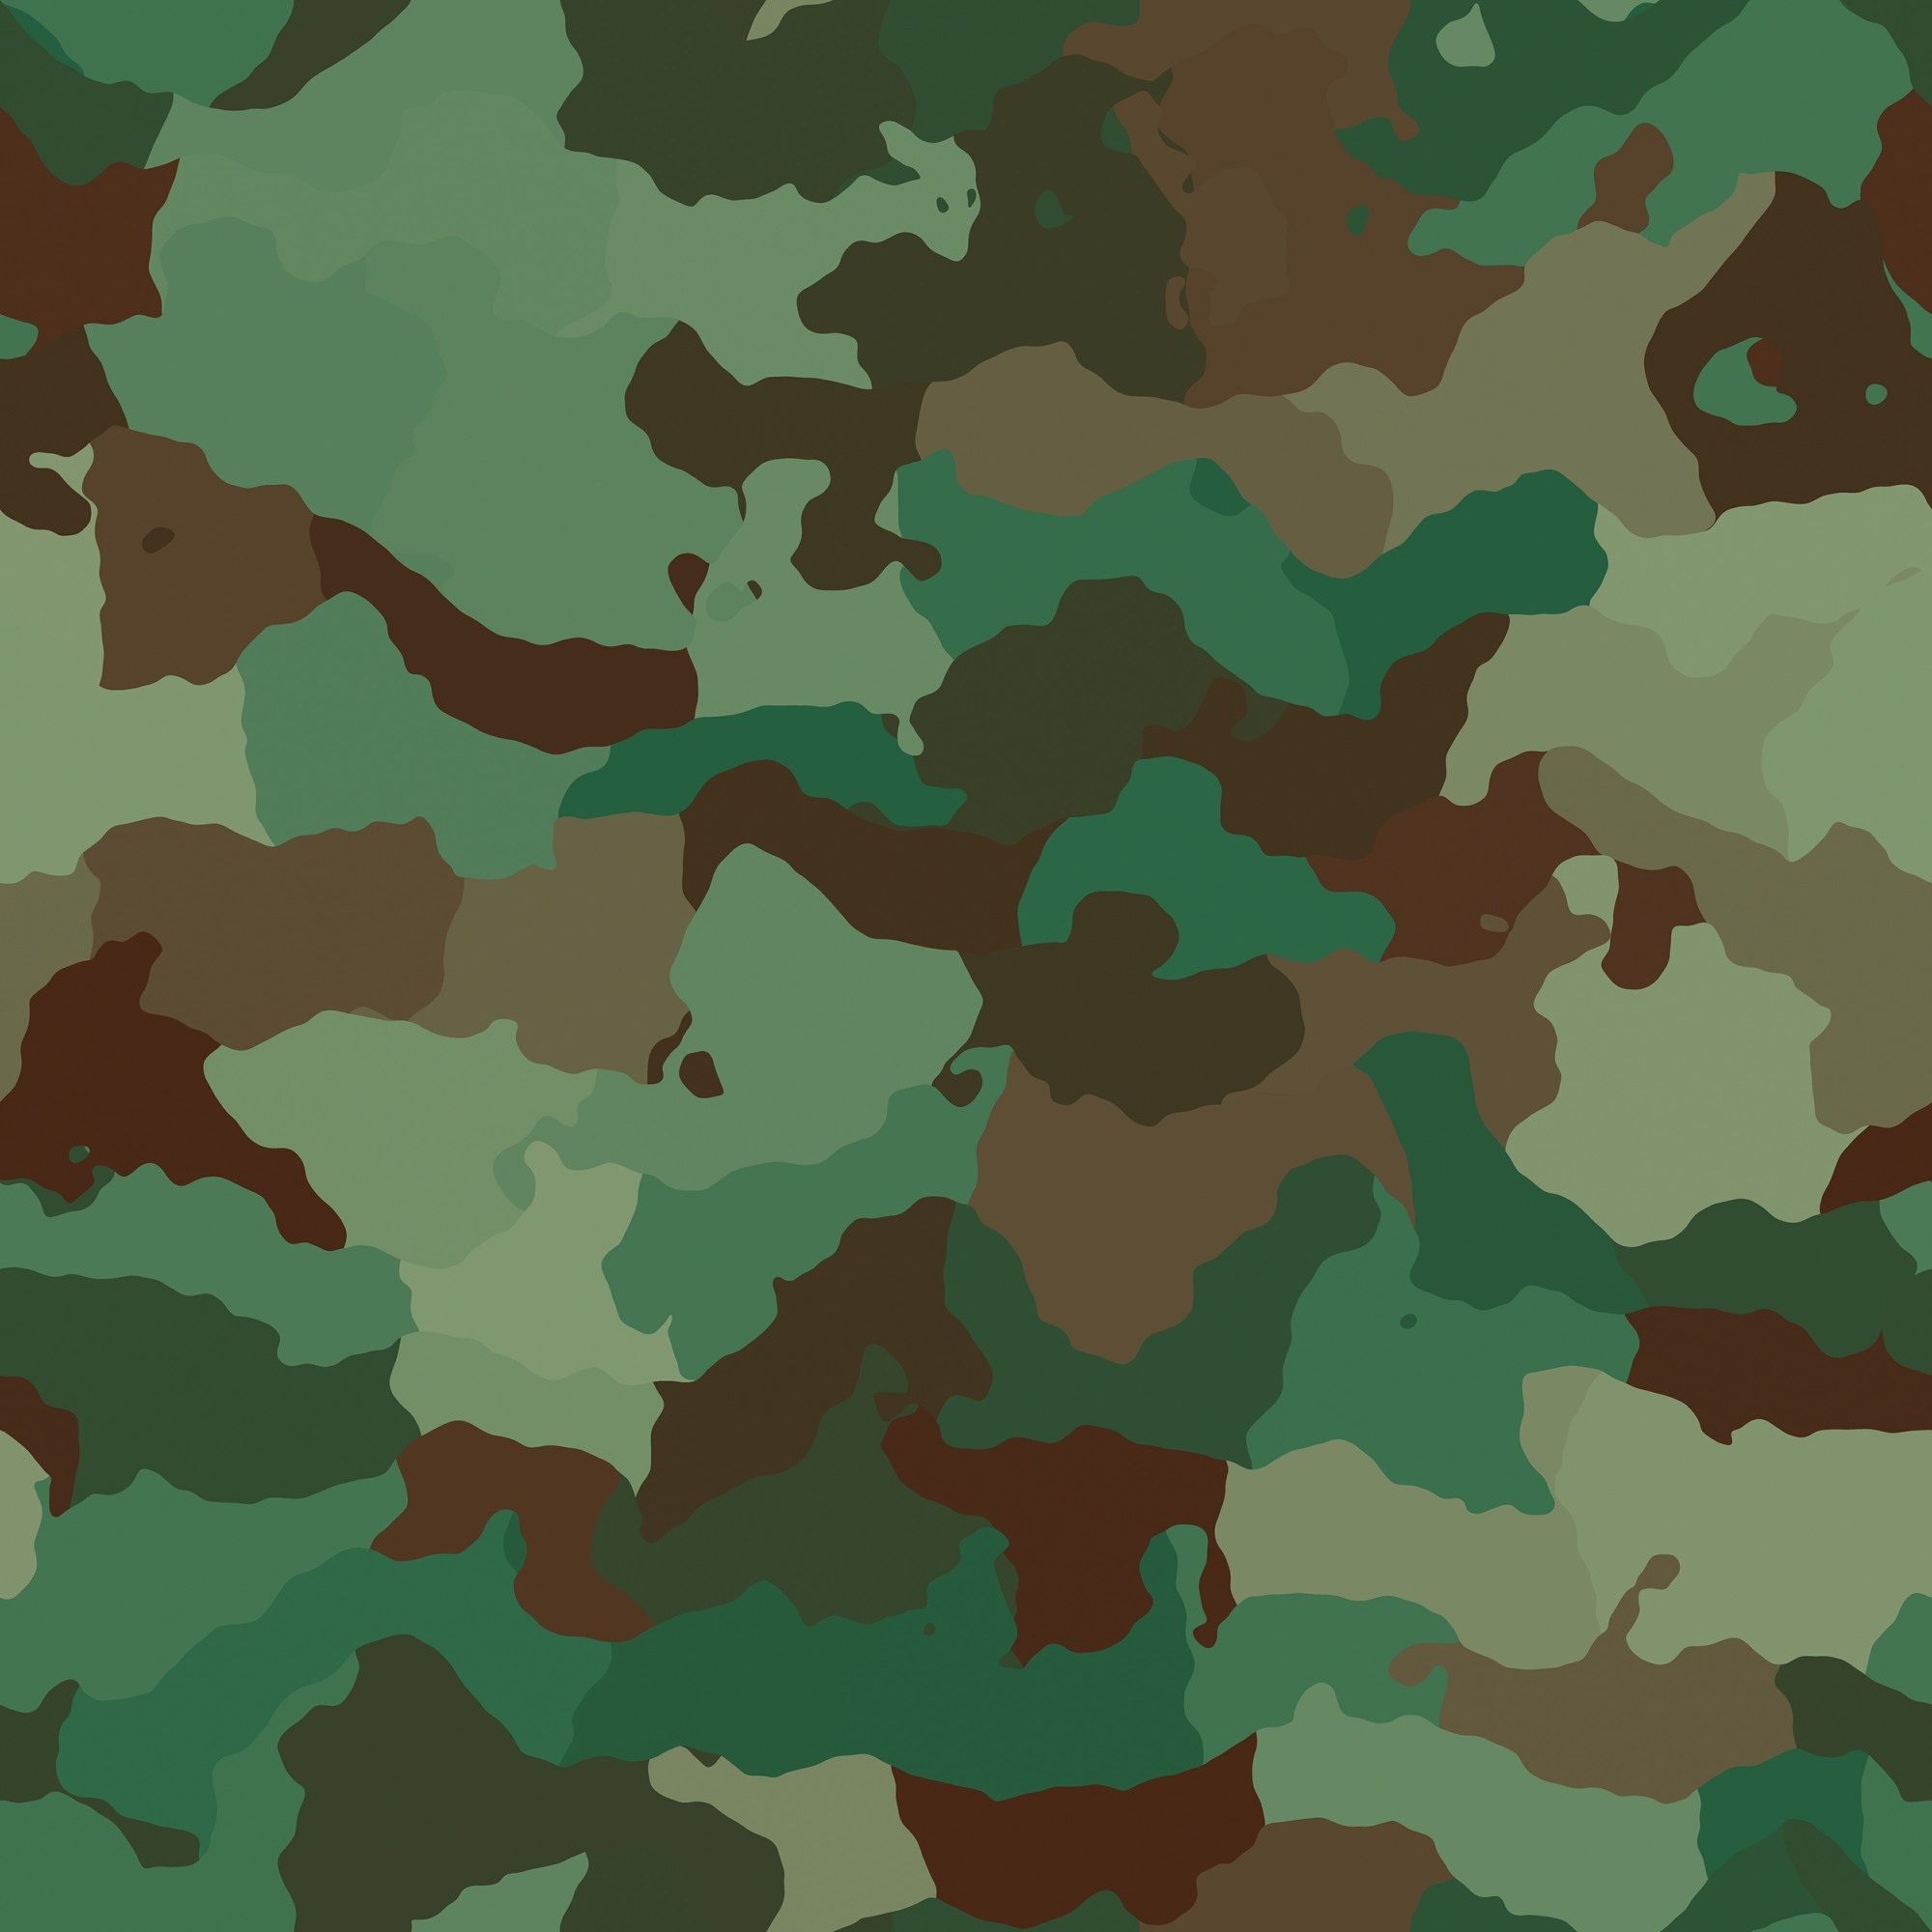 93526 download wallpaper camouflage, texture, textures, military screensavers and pictures for free